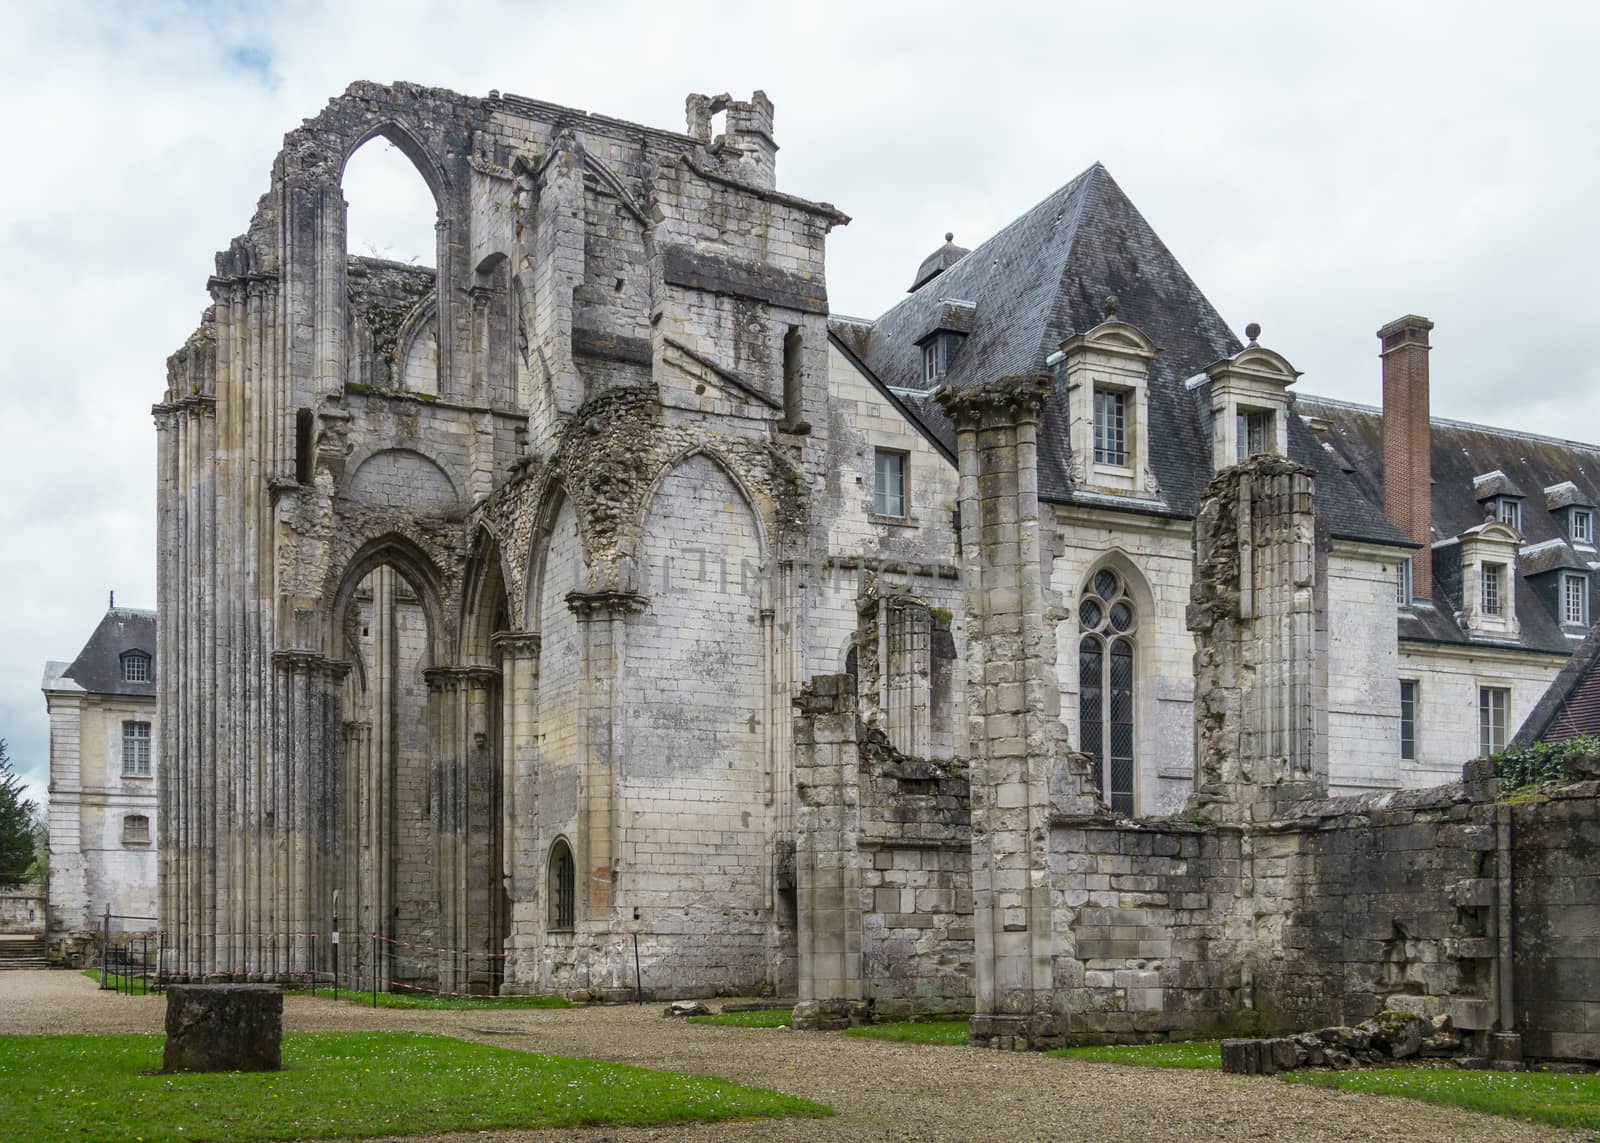 the ruins of the Saint Wandrille abbey in northern France by Tetyana